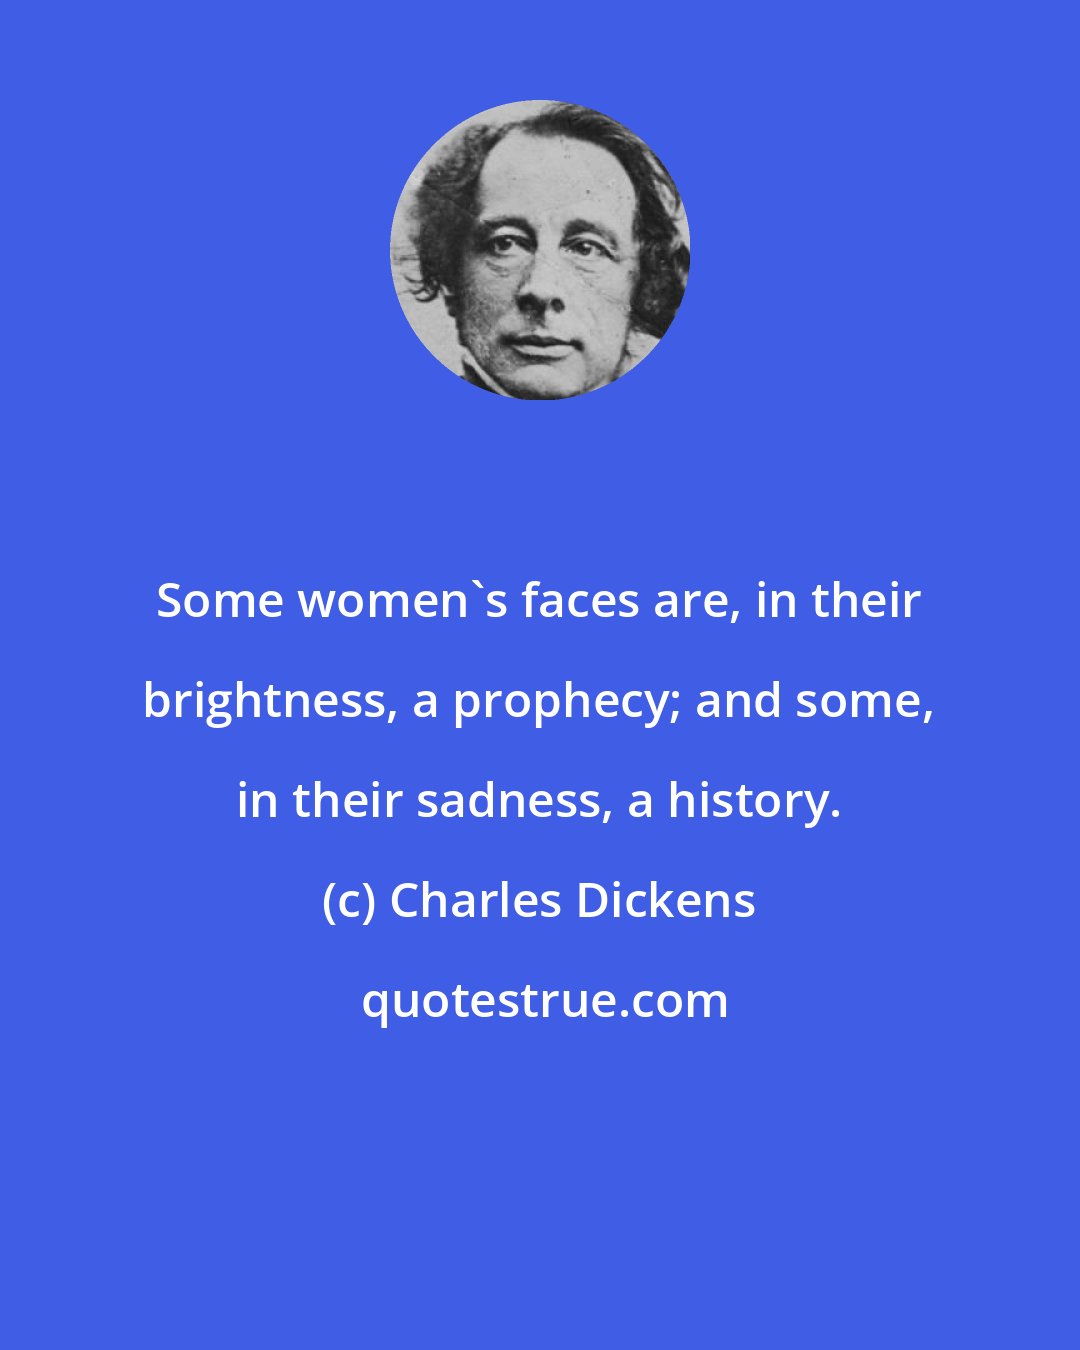 Charles Dickens: Some women's faces are, in their brightness, a prophecy; and some, in their sadness, a history.